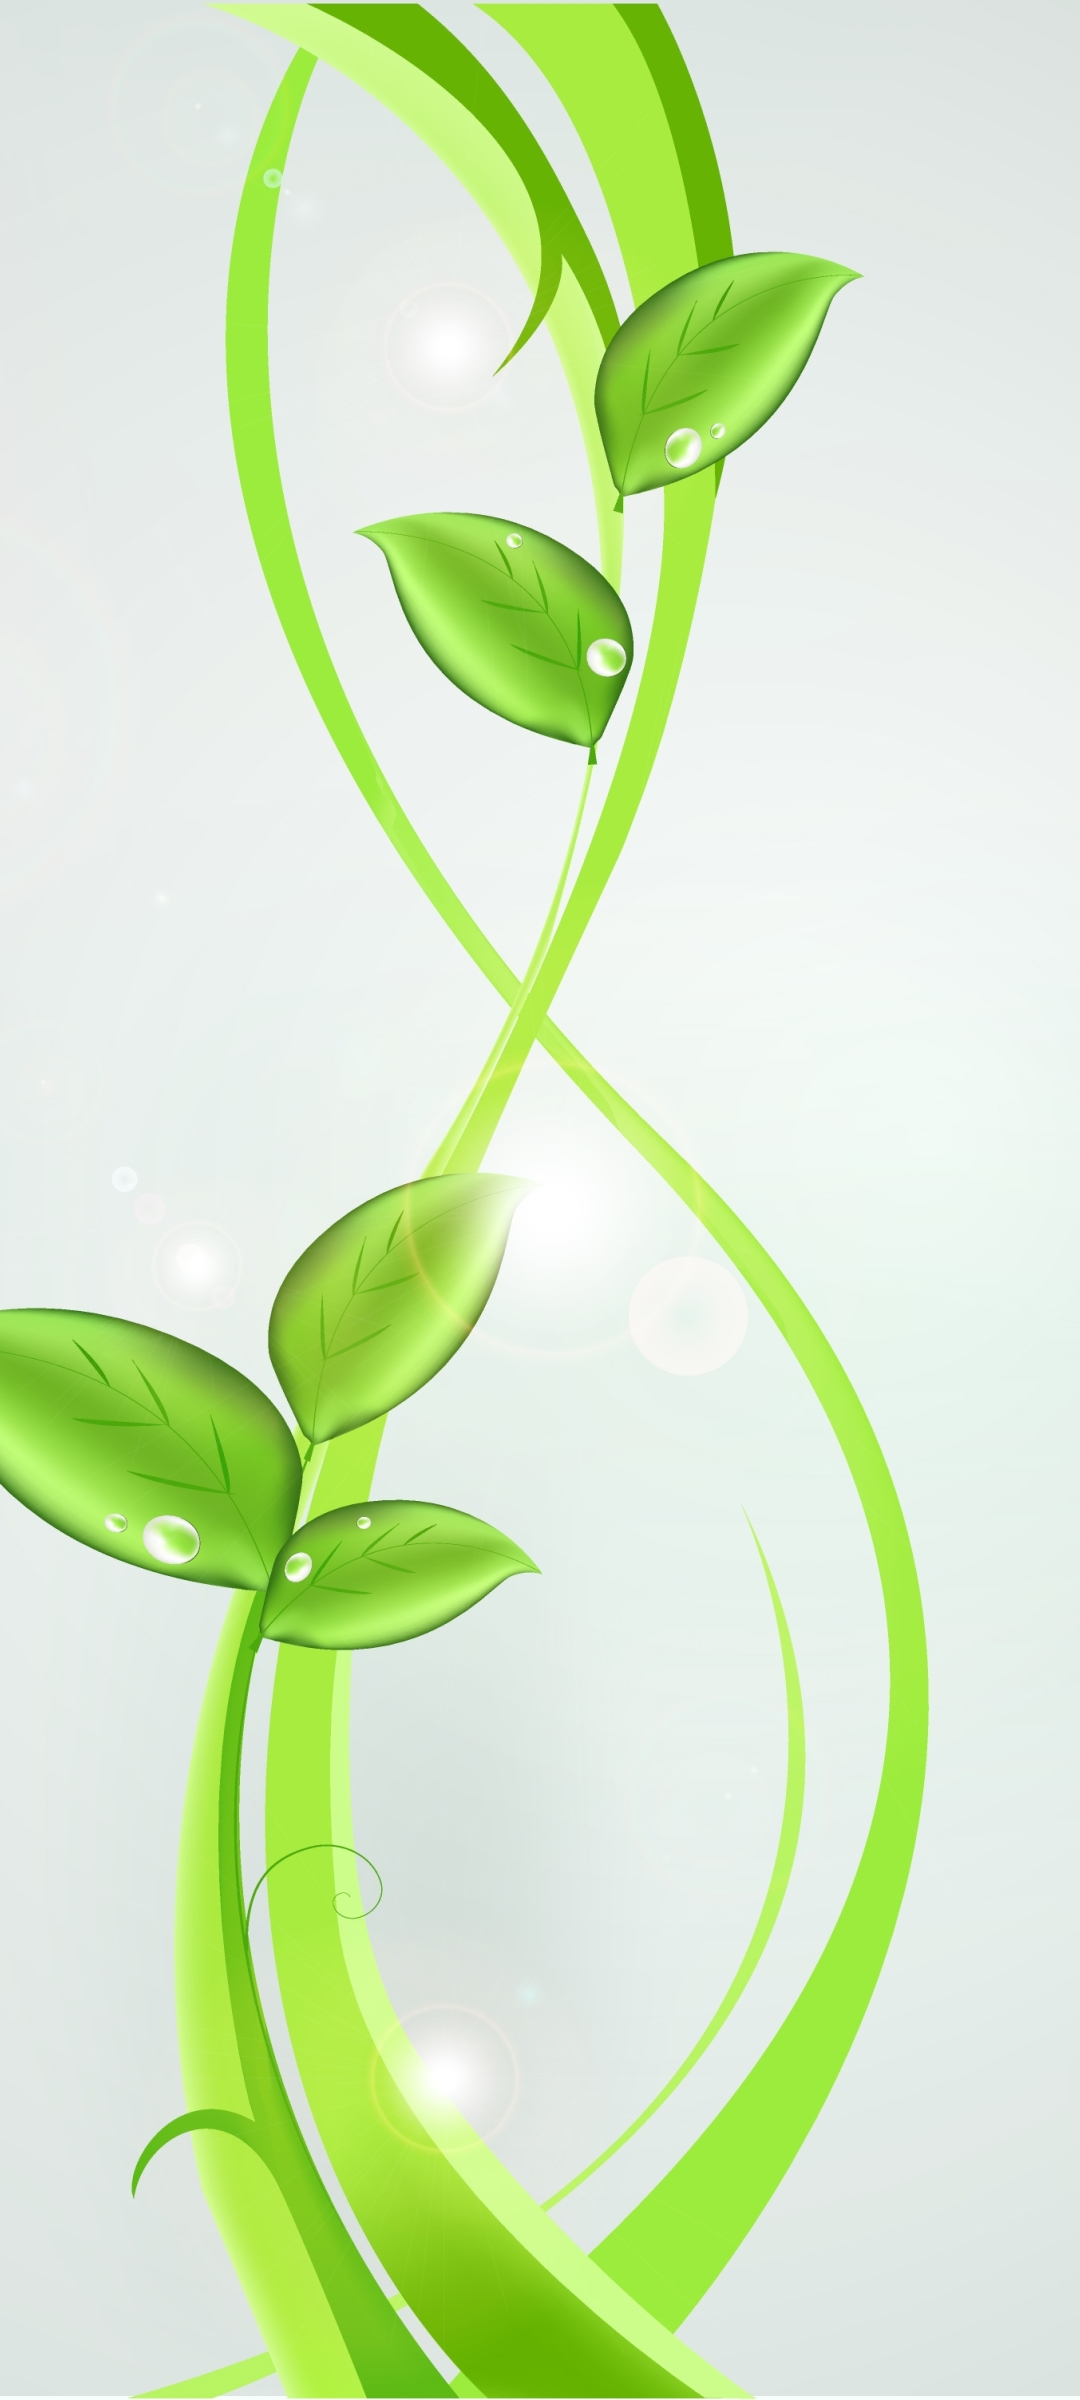 1080x2400 plants, green, abstract 1080x2400 Resolution Wallpaper, HD Abstract 4K Wallpapers